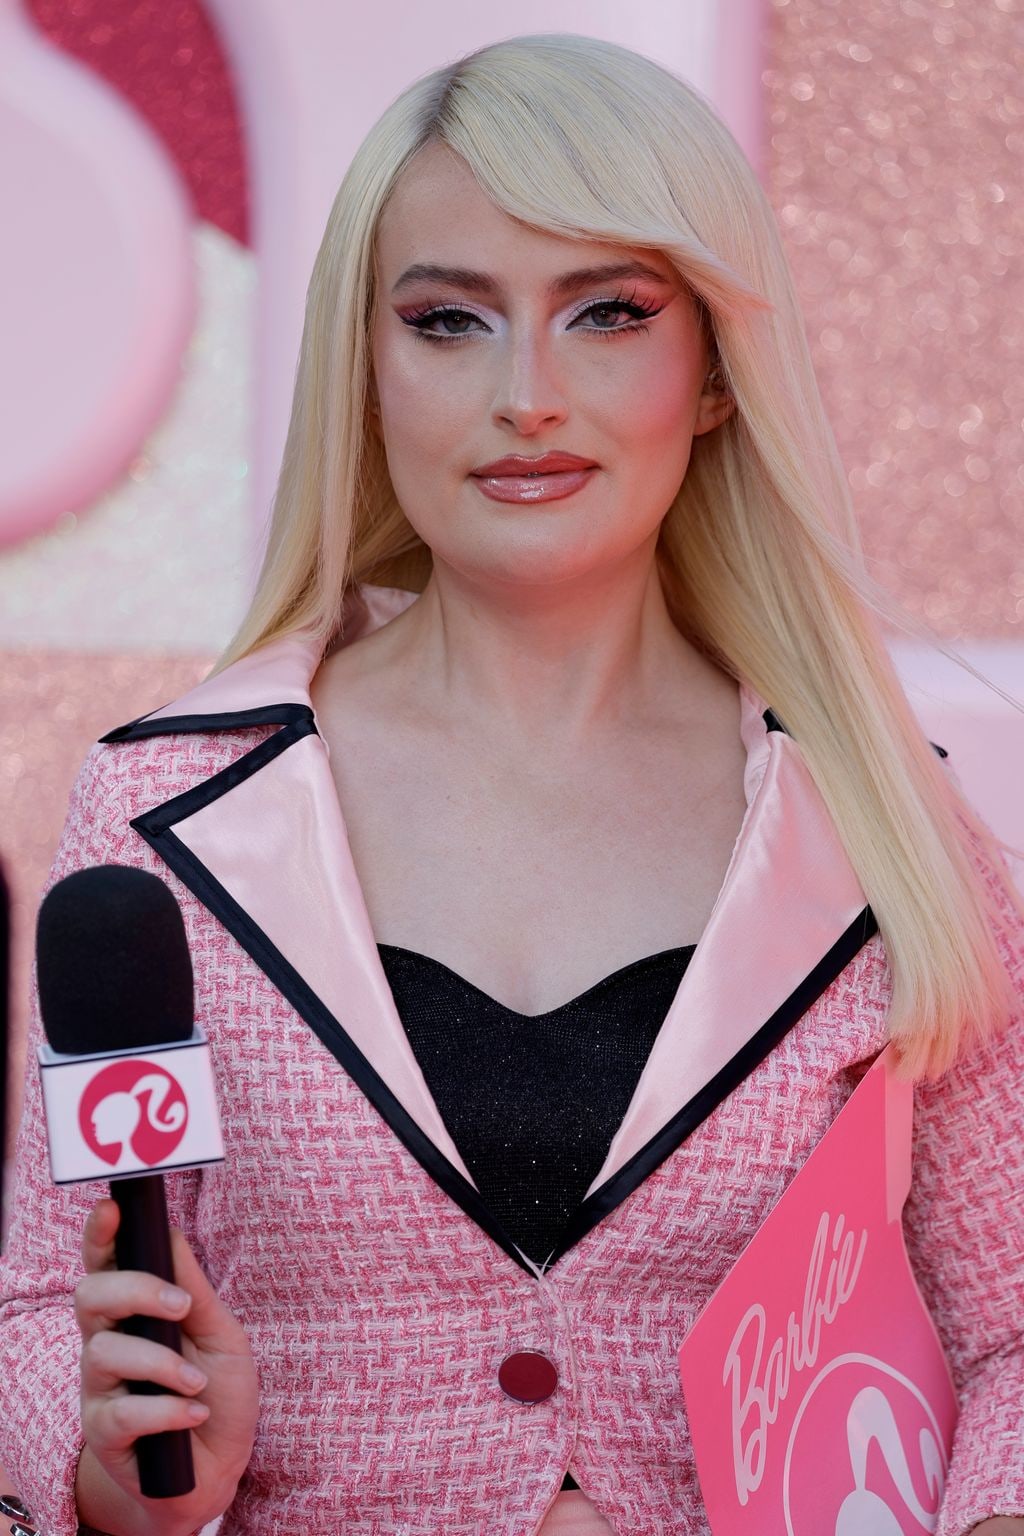 Amelia Dimoldenberg wears a pink suit and holds a Barbie-themed microphone